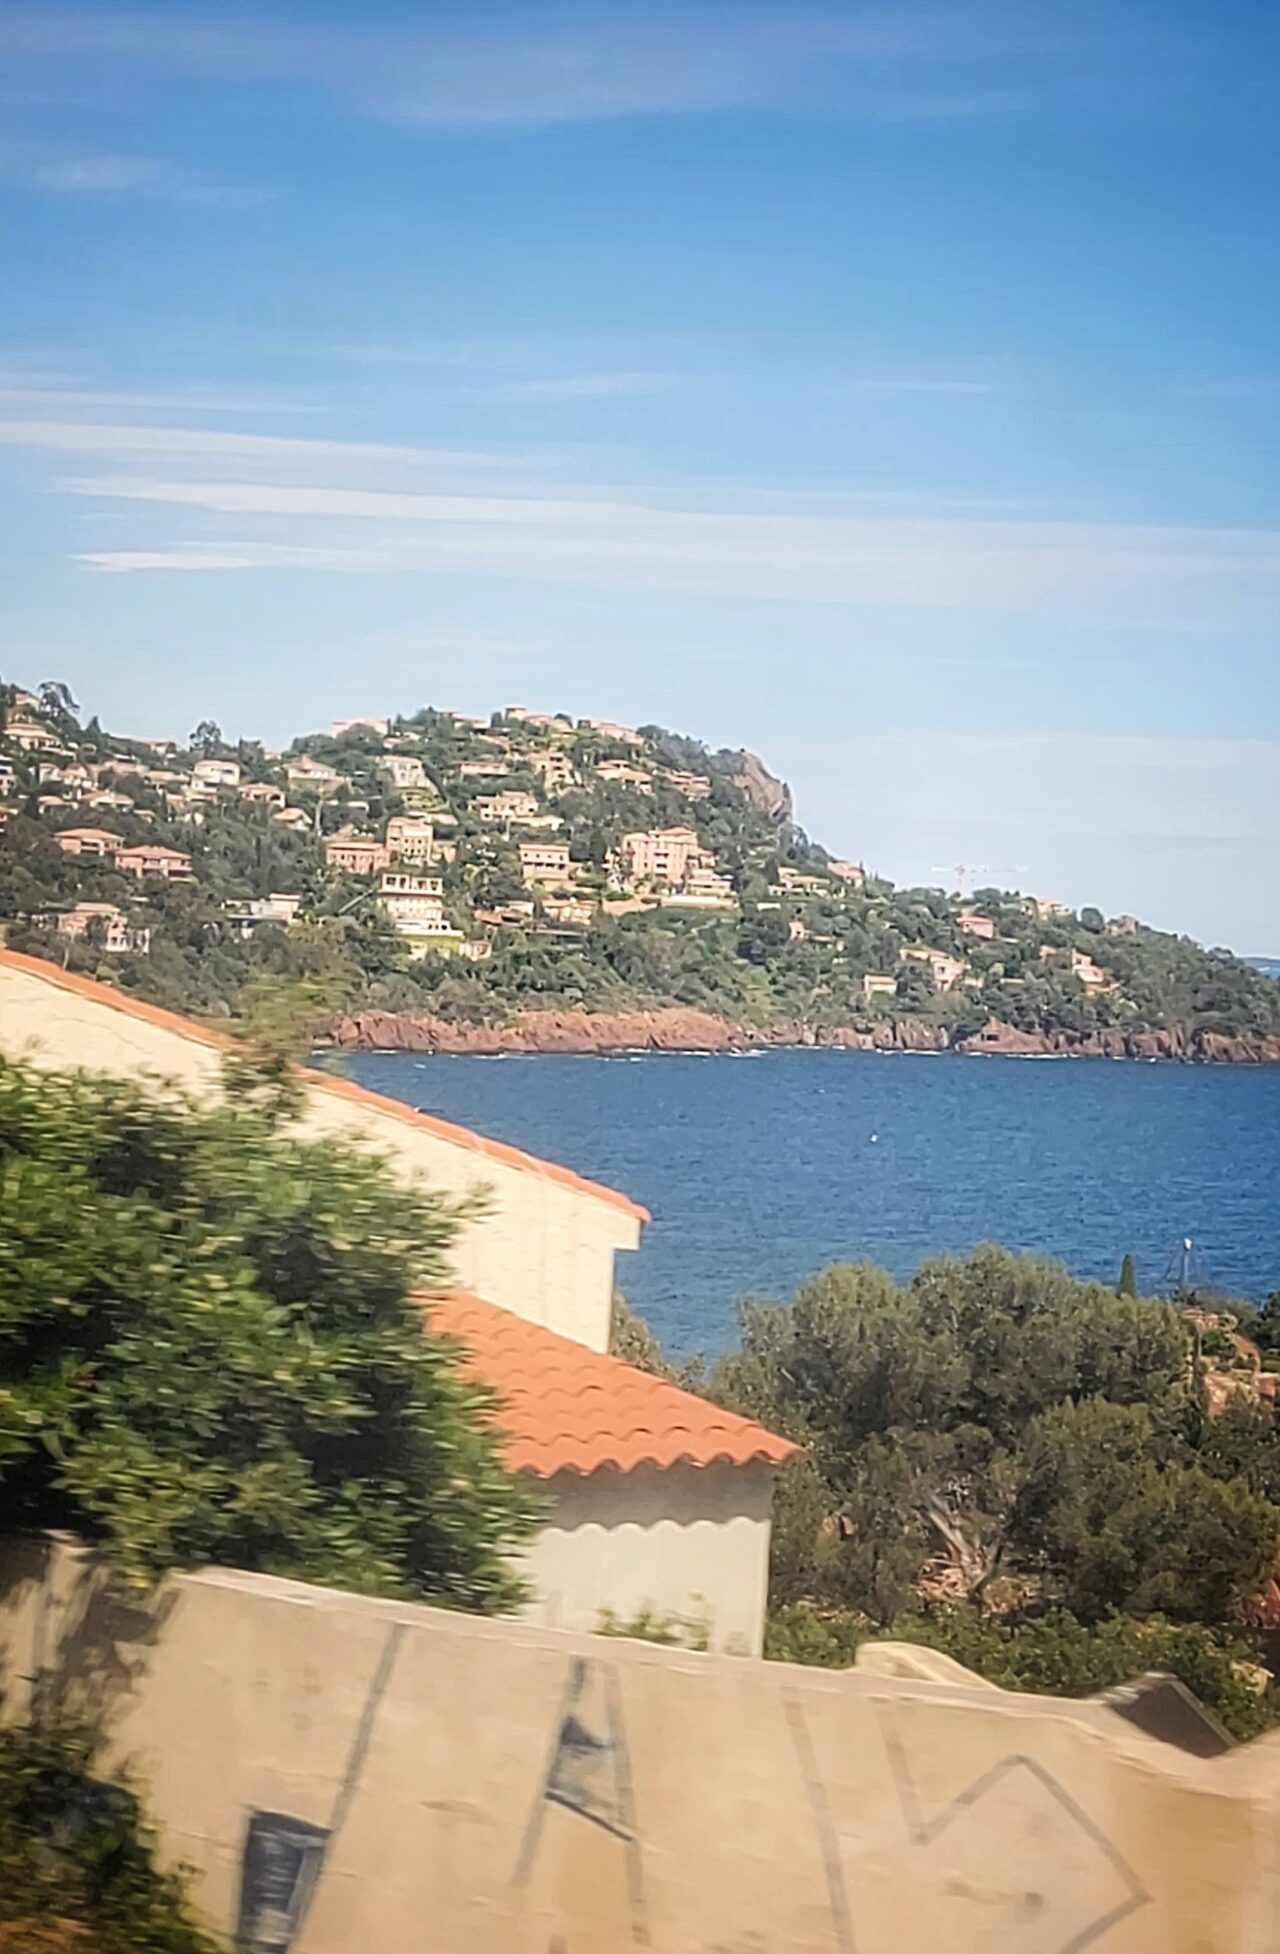 The view of the French countryside from the train.